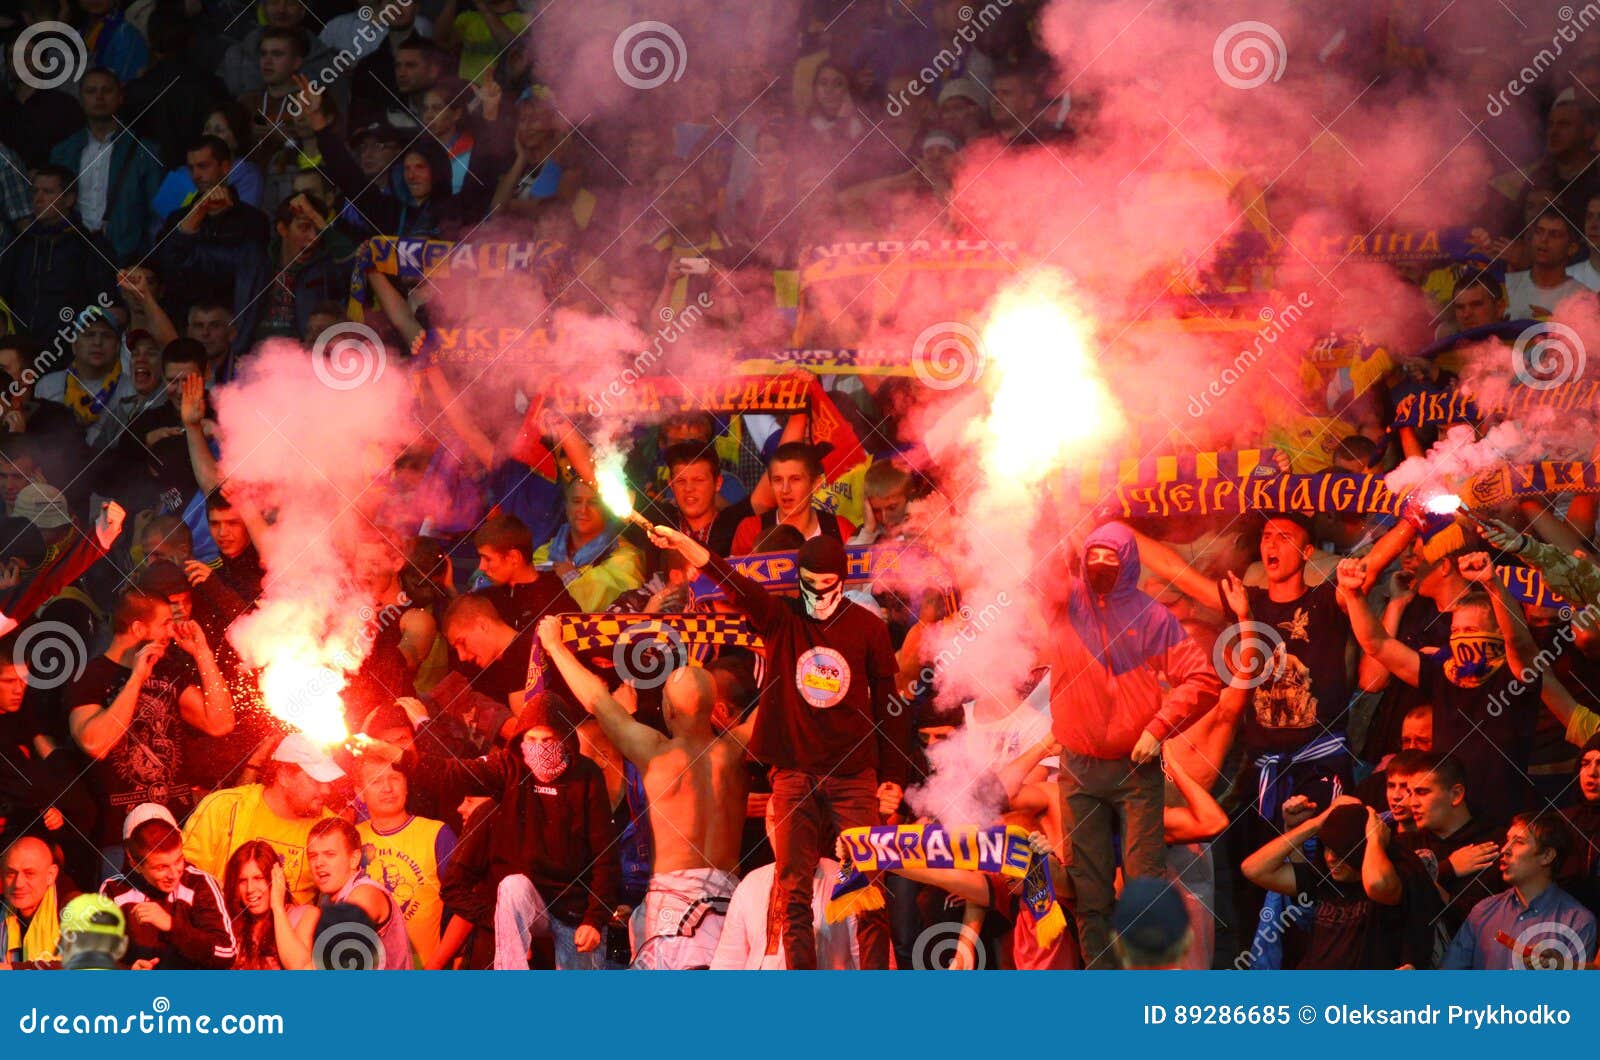 Football Ultra Supporters Ultras Image - of people, game: 89286685